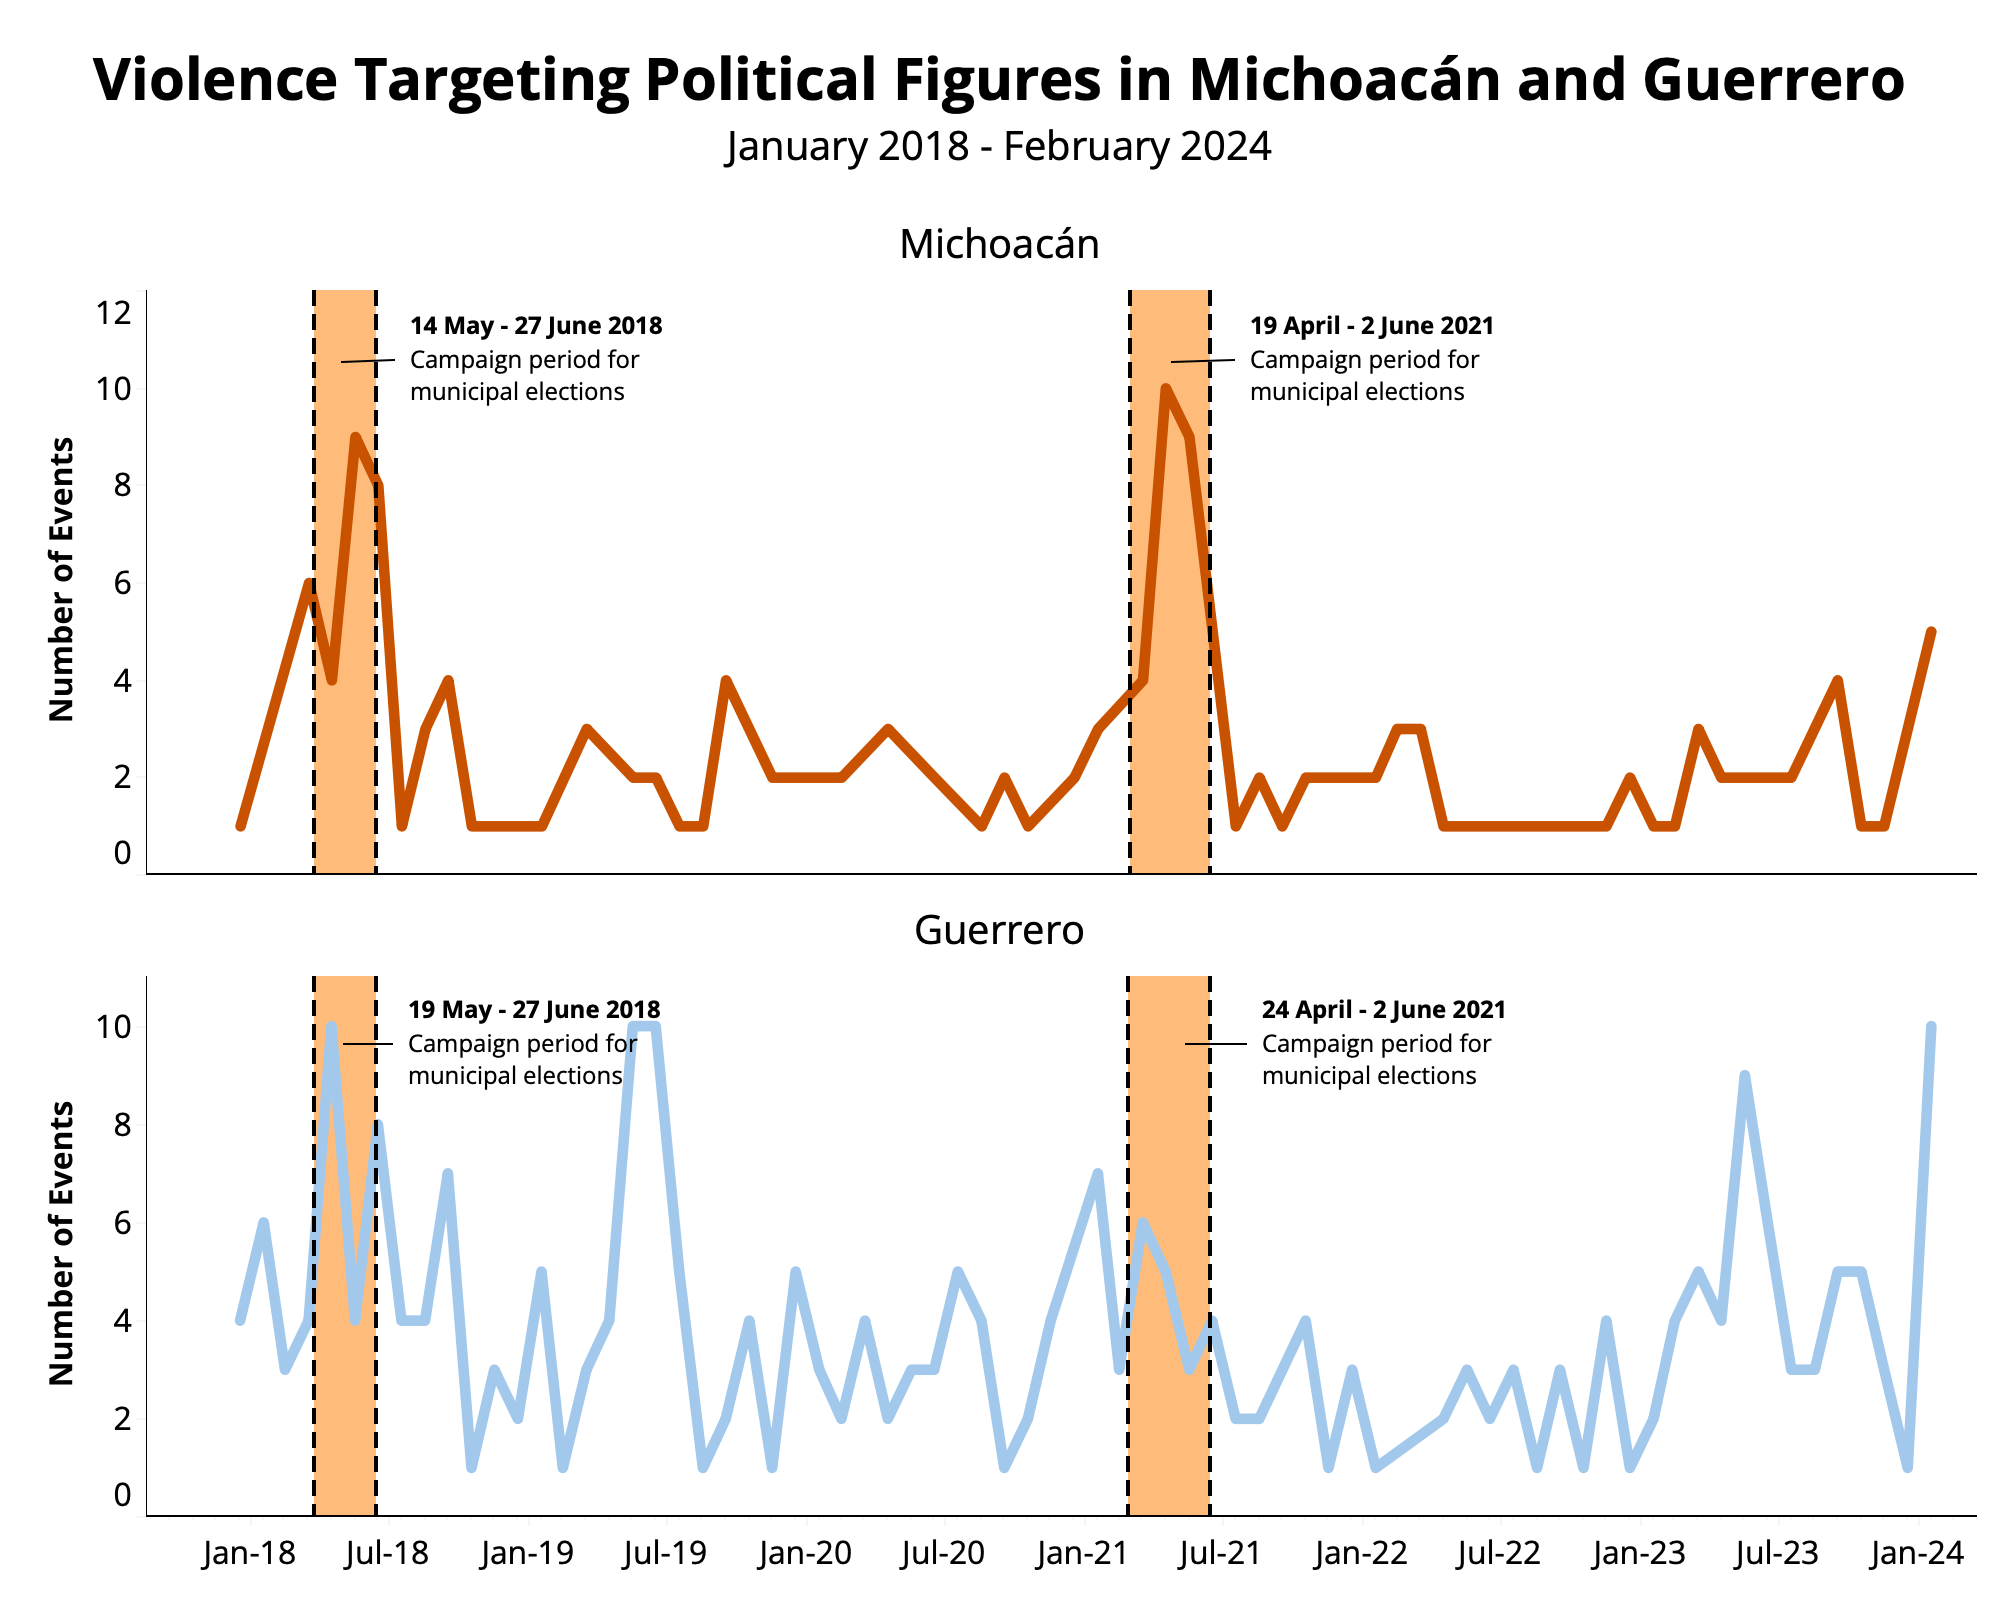 Violence targeting political figures in Michoacan and Guerrero